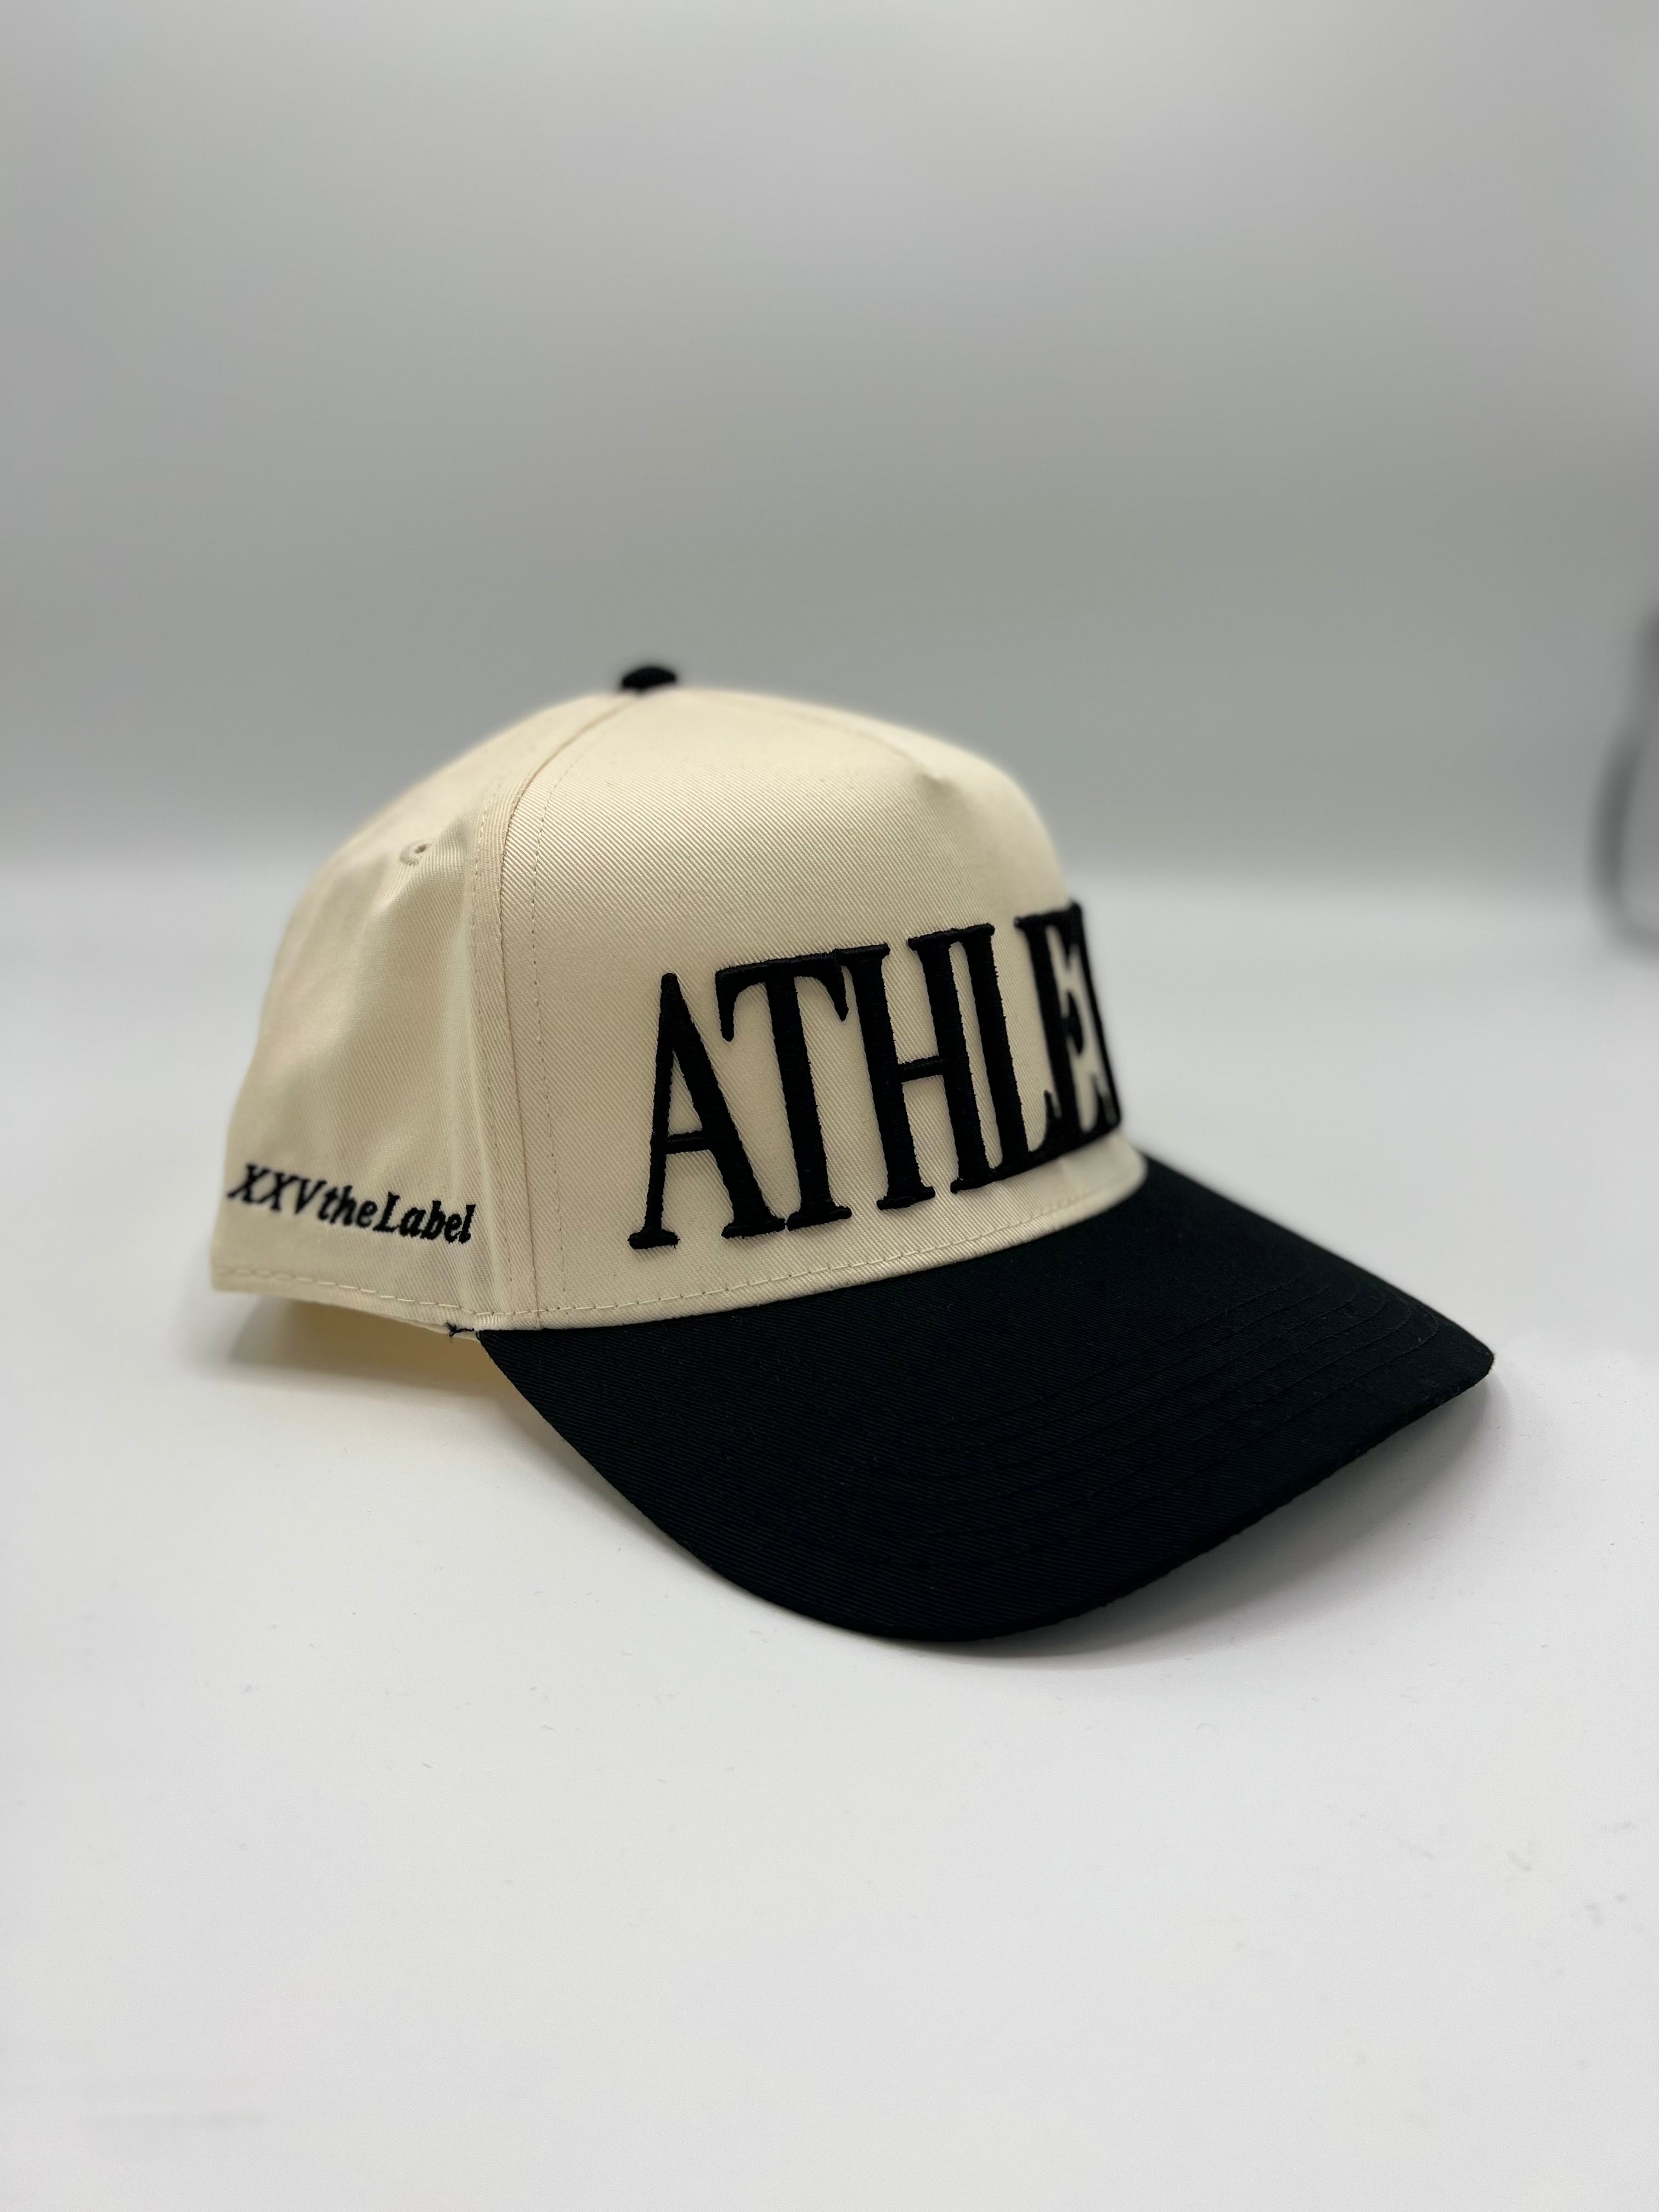 custom embroidered hat